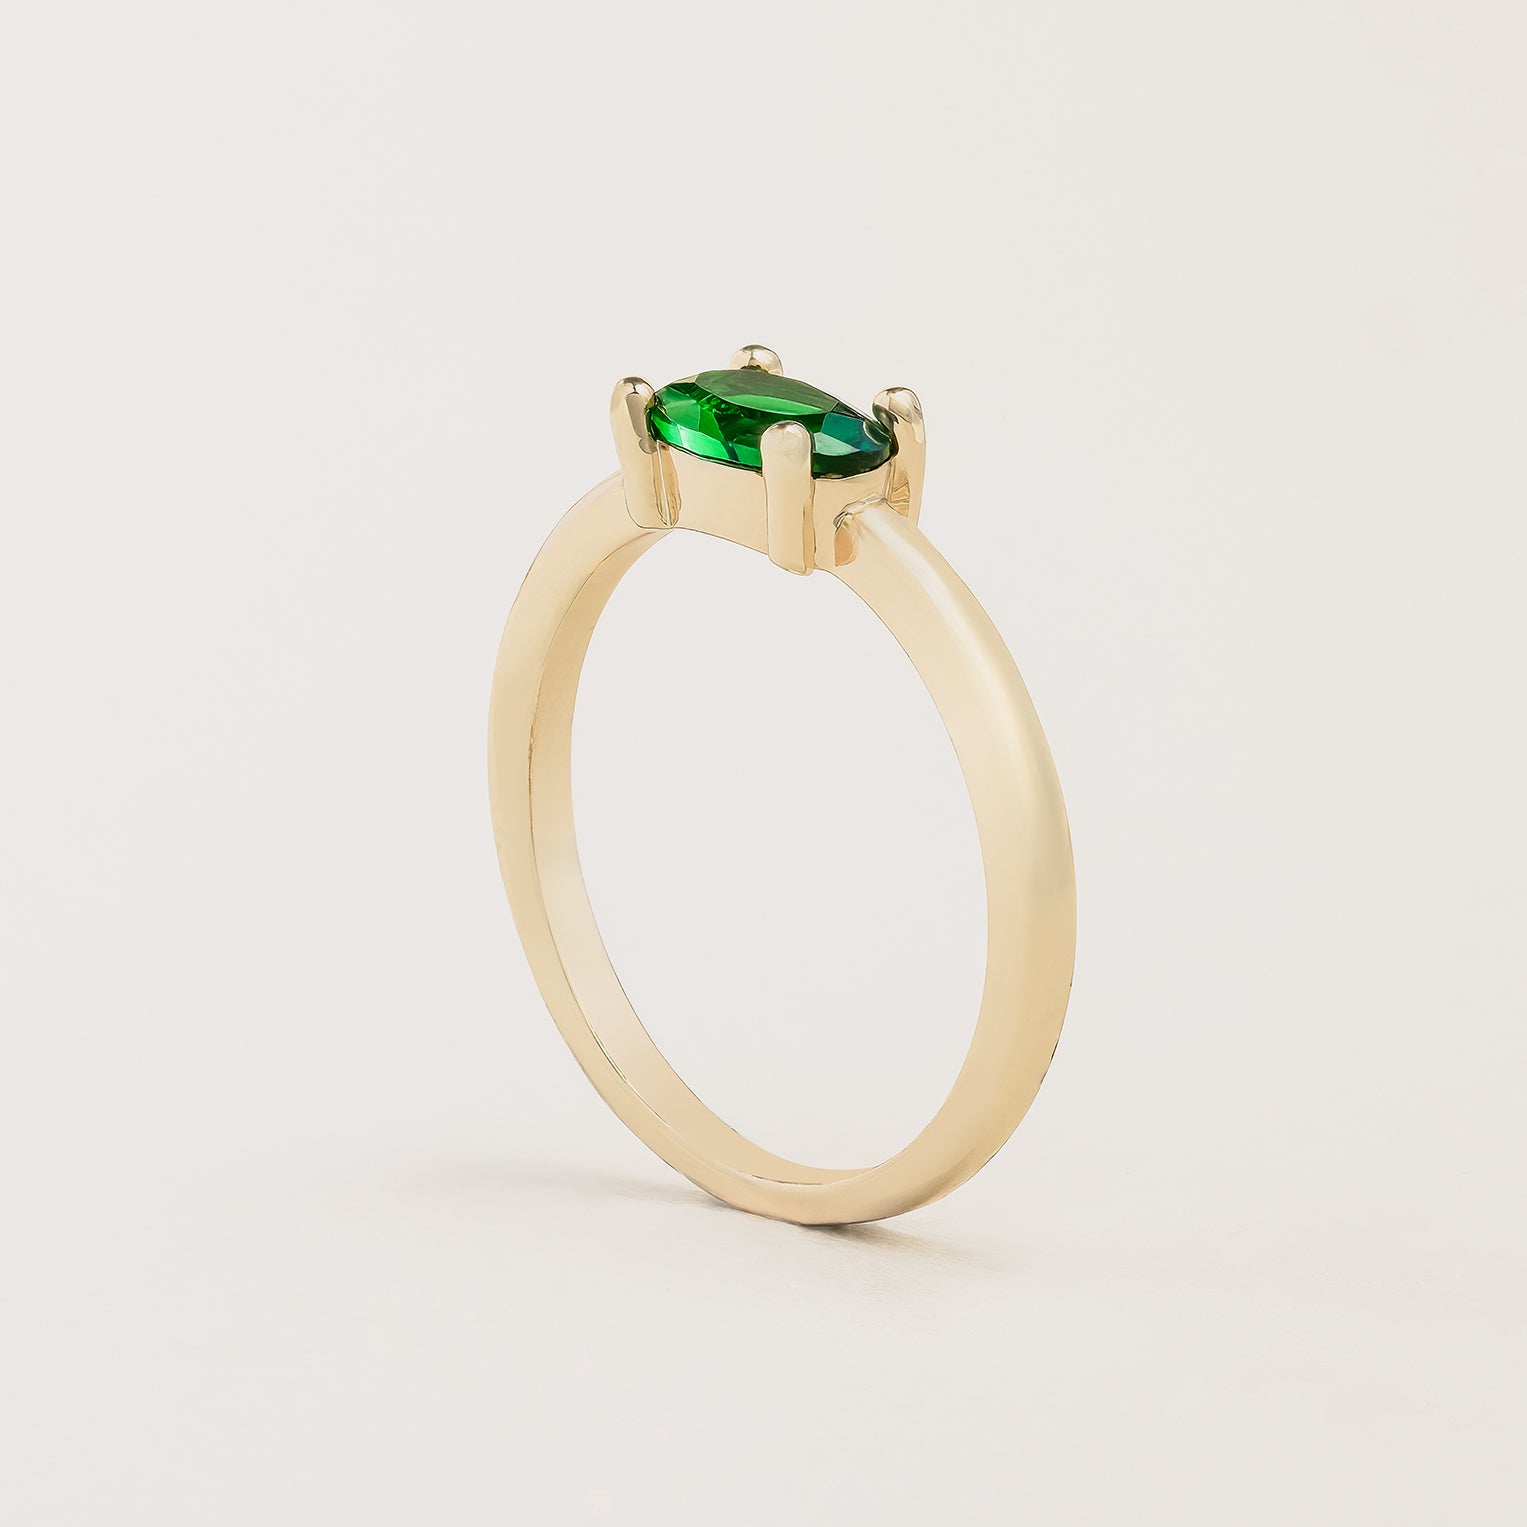 Oval Solitaire Emerald Ring Setting